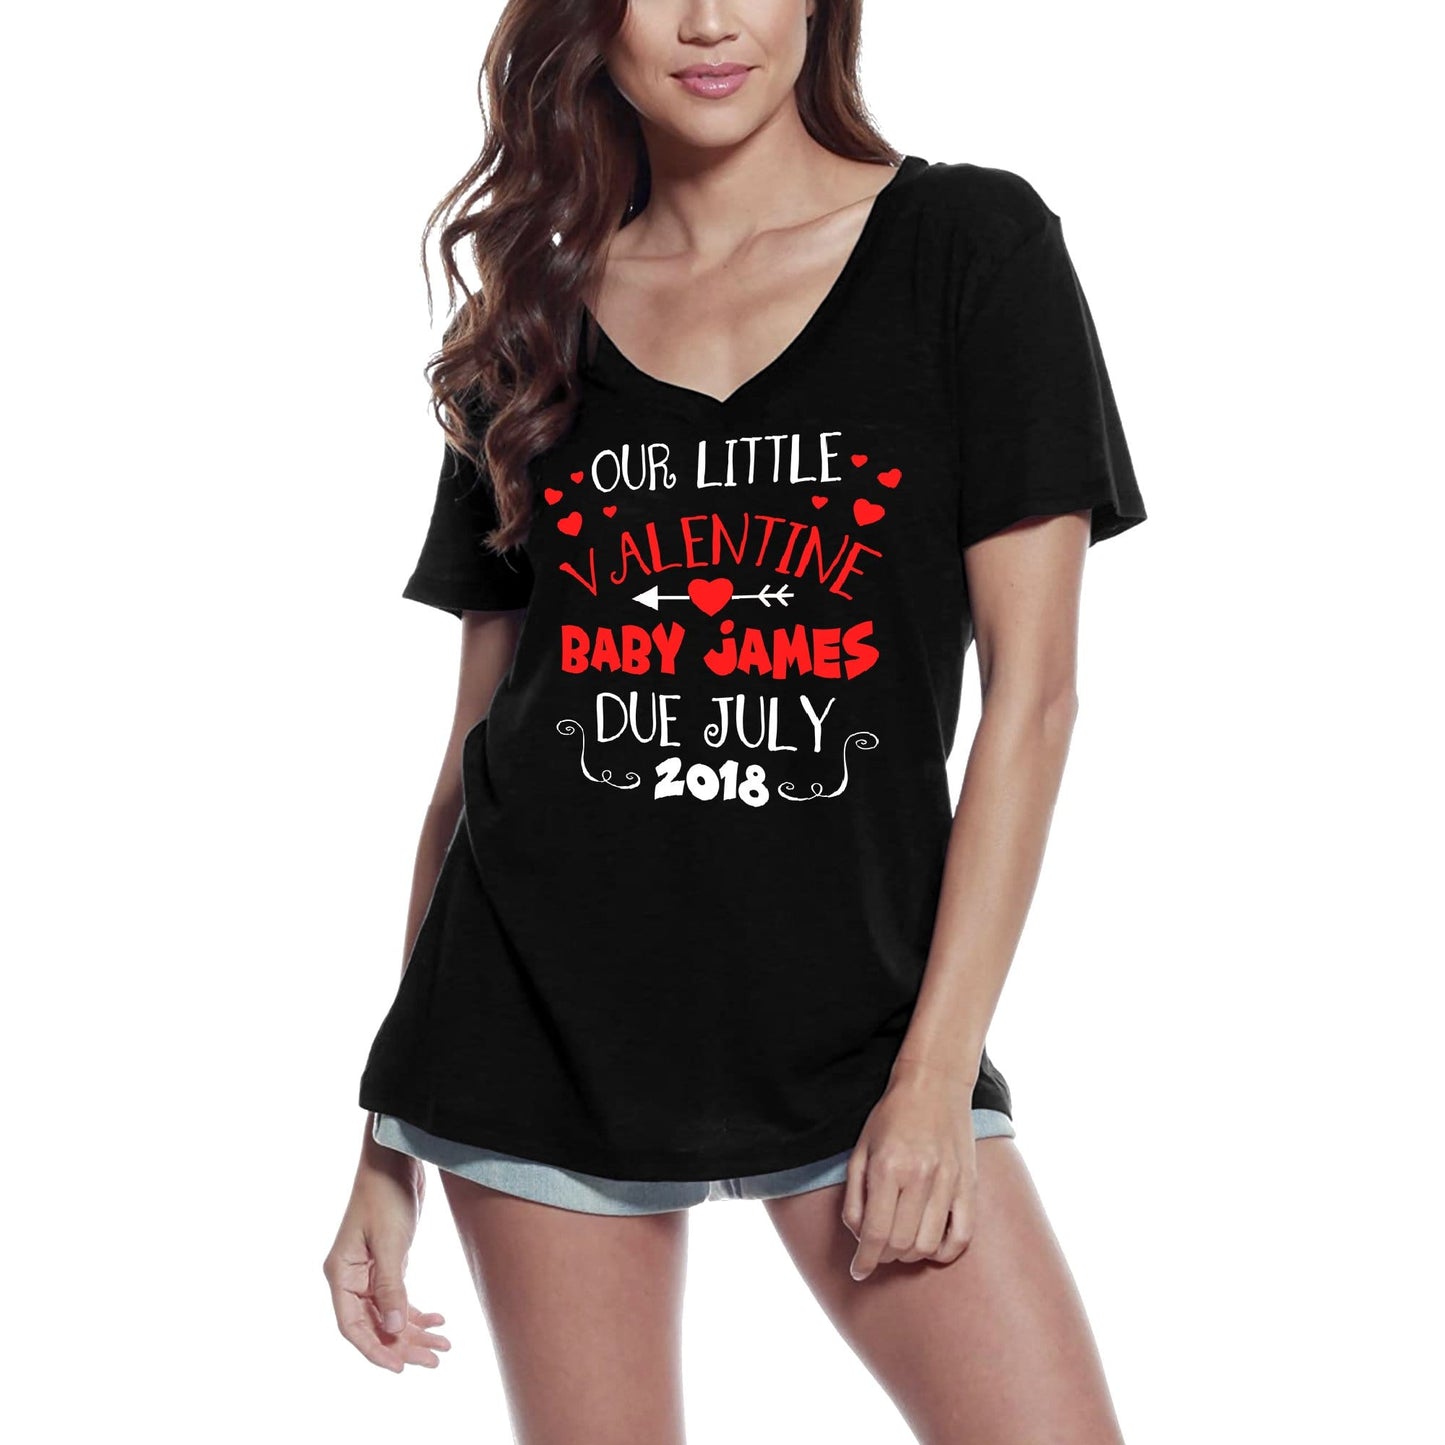 ULTRABASIC Women's T-Shirt Our Little Valentine - Valentine's Day Short Sleeve Graphic Tees Tops